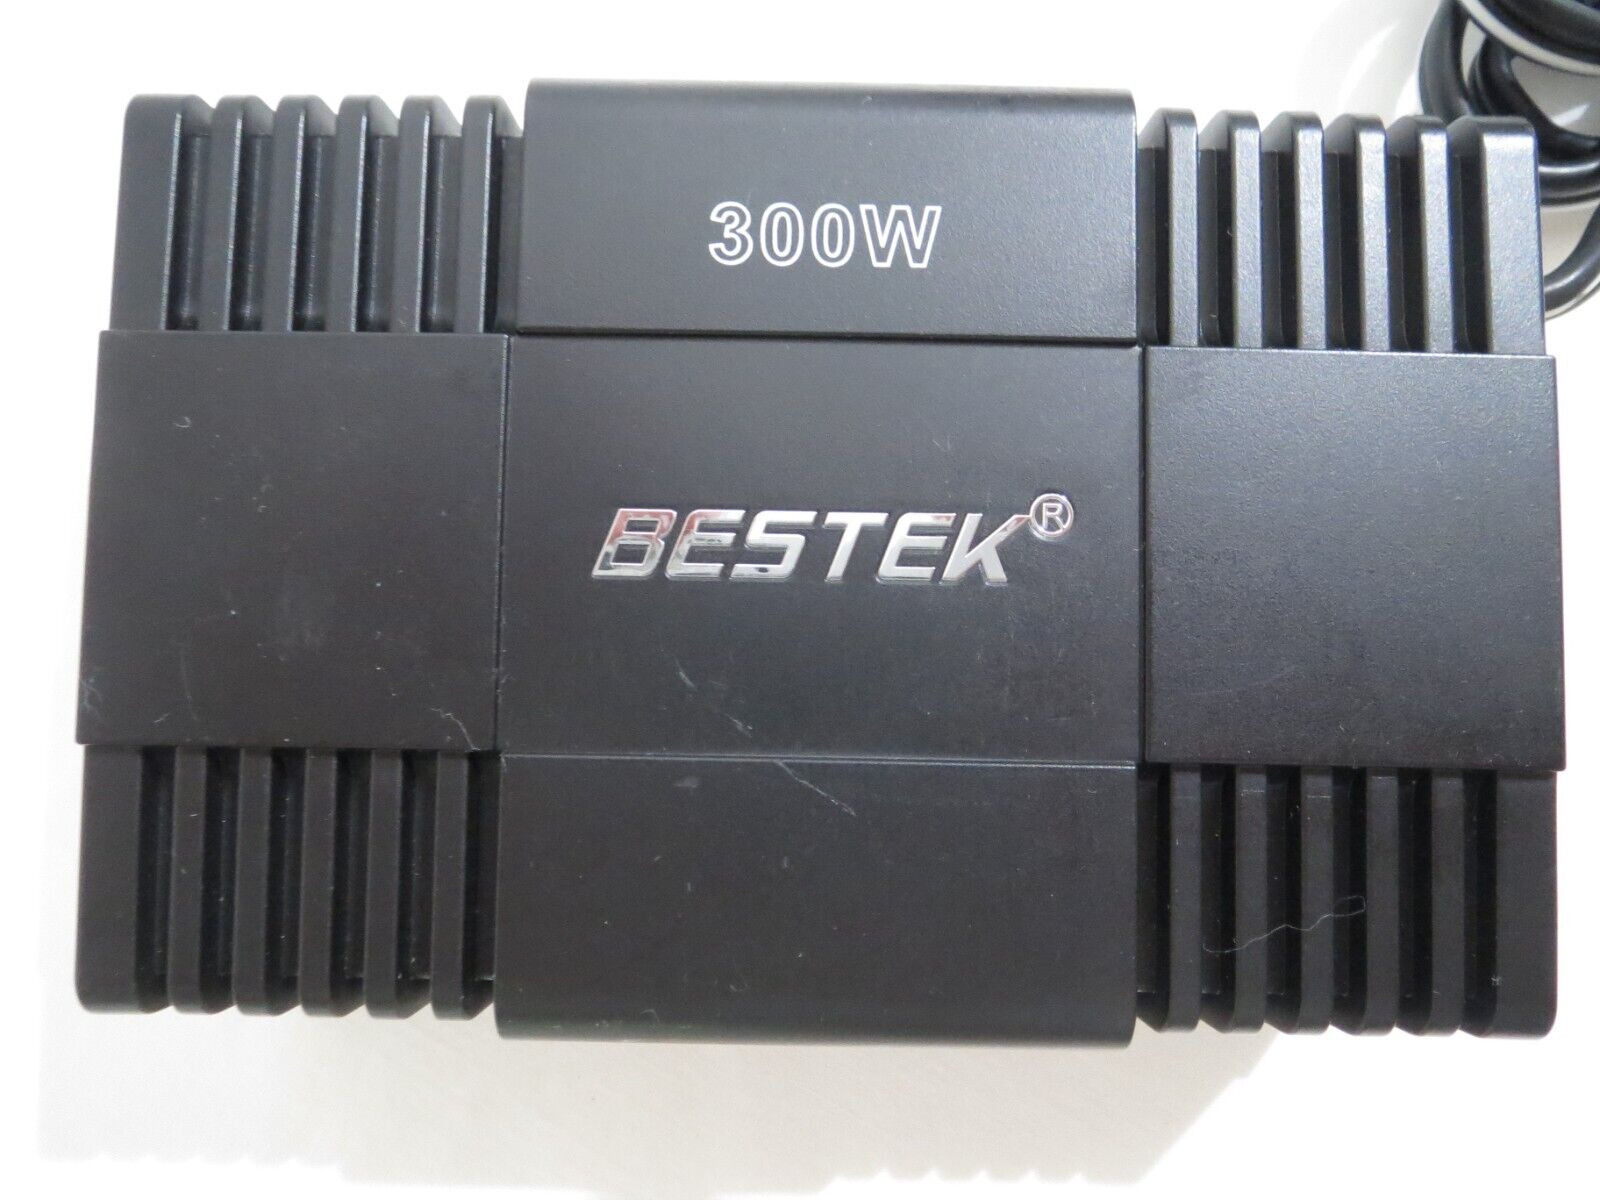 BESTEK 300W Power Inverter DC 12V to 110V AC Car Adapter with 4.8A Dual USB 